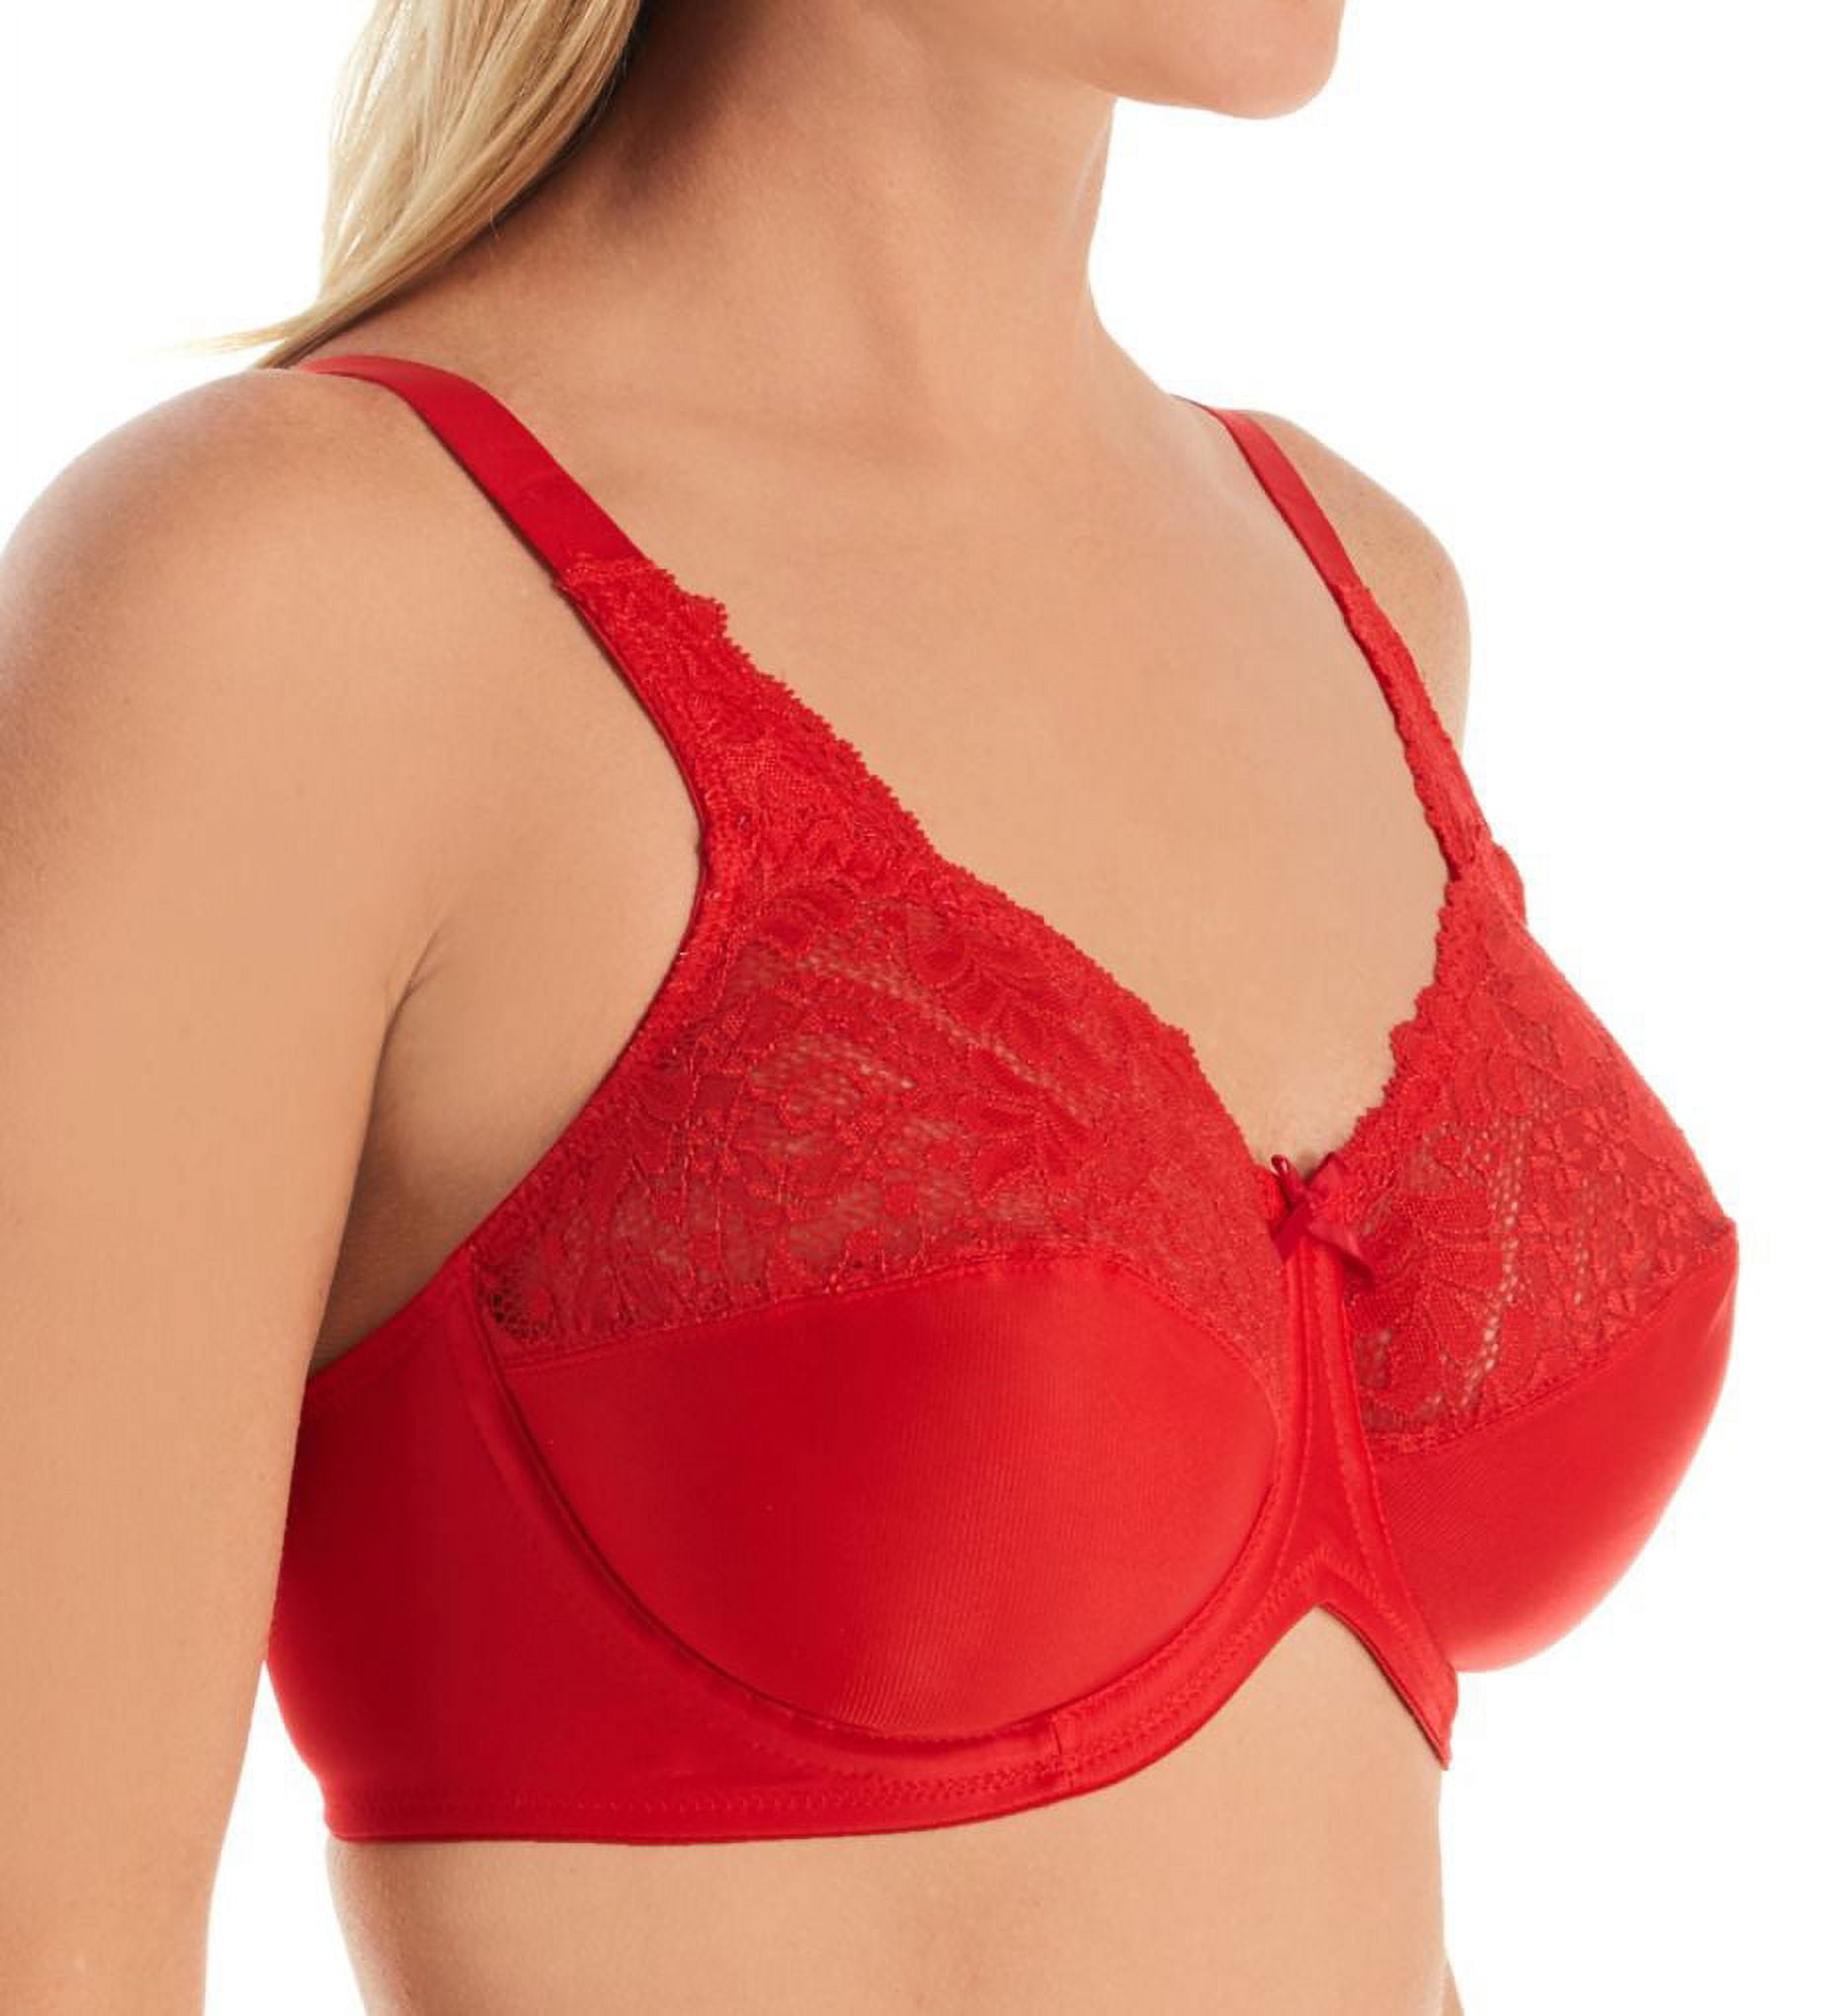 Lilyette by Bali Womens Tailored Minimizer Bra with Lace Trim -  Best-Seller, 36 